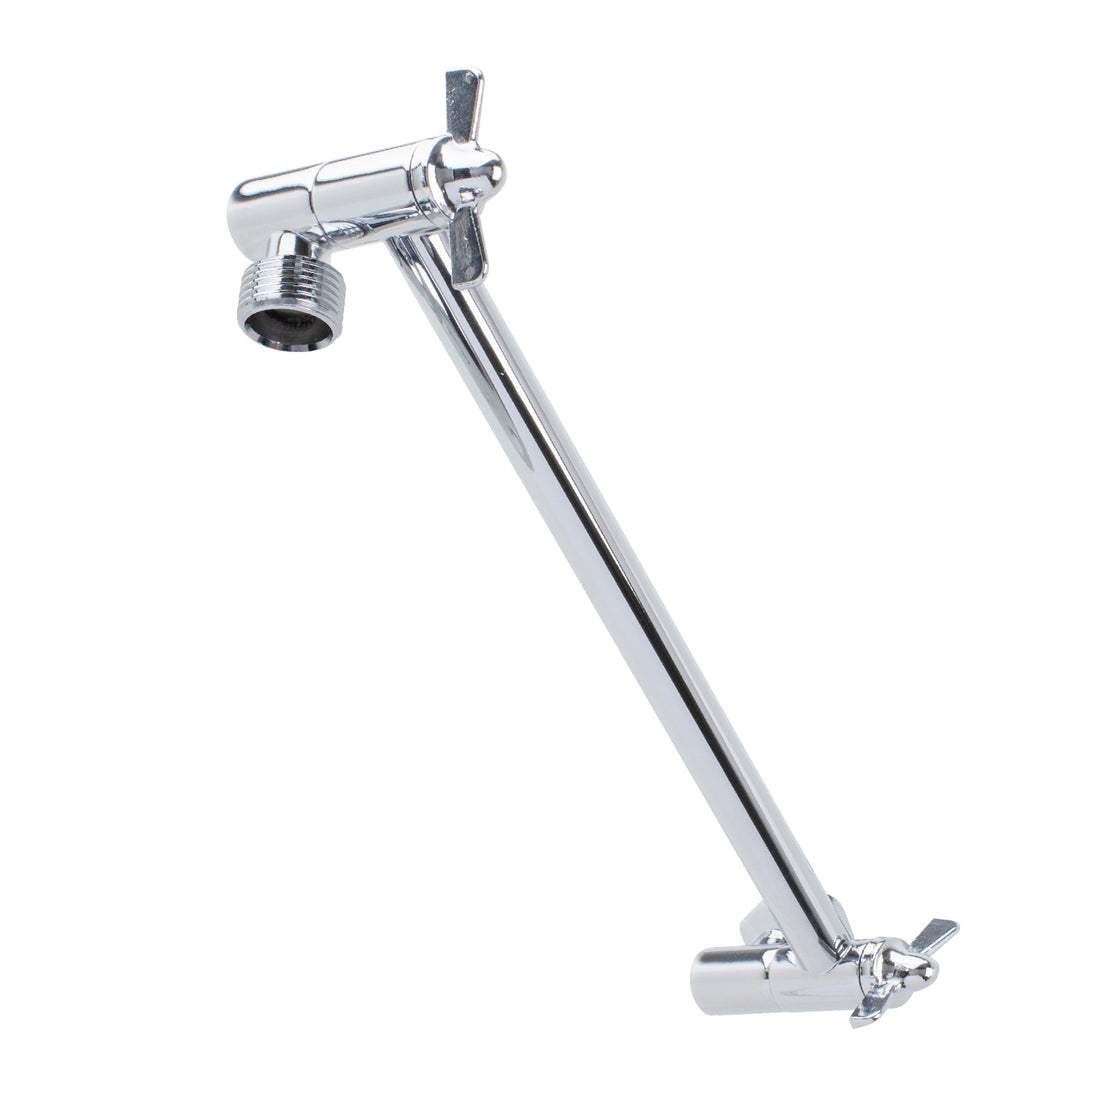 10 in. Solid Brass Shower Head Extension Arm with Flange (Chrome Finish) - Utility sinks vanites Tehila